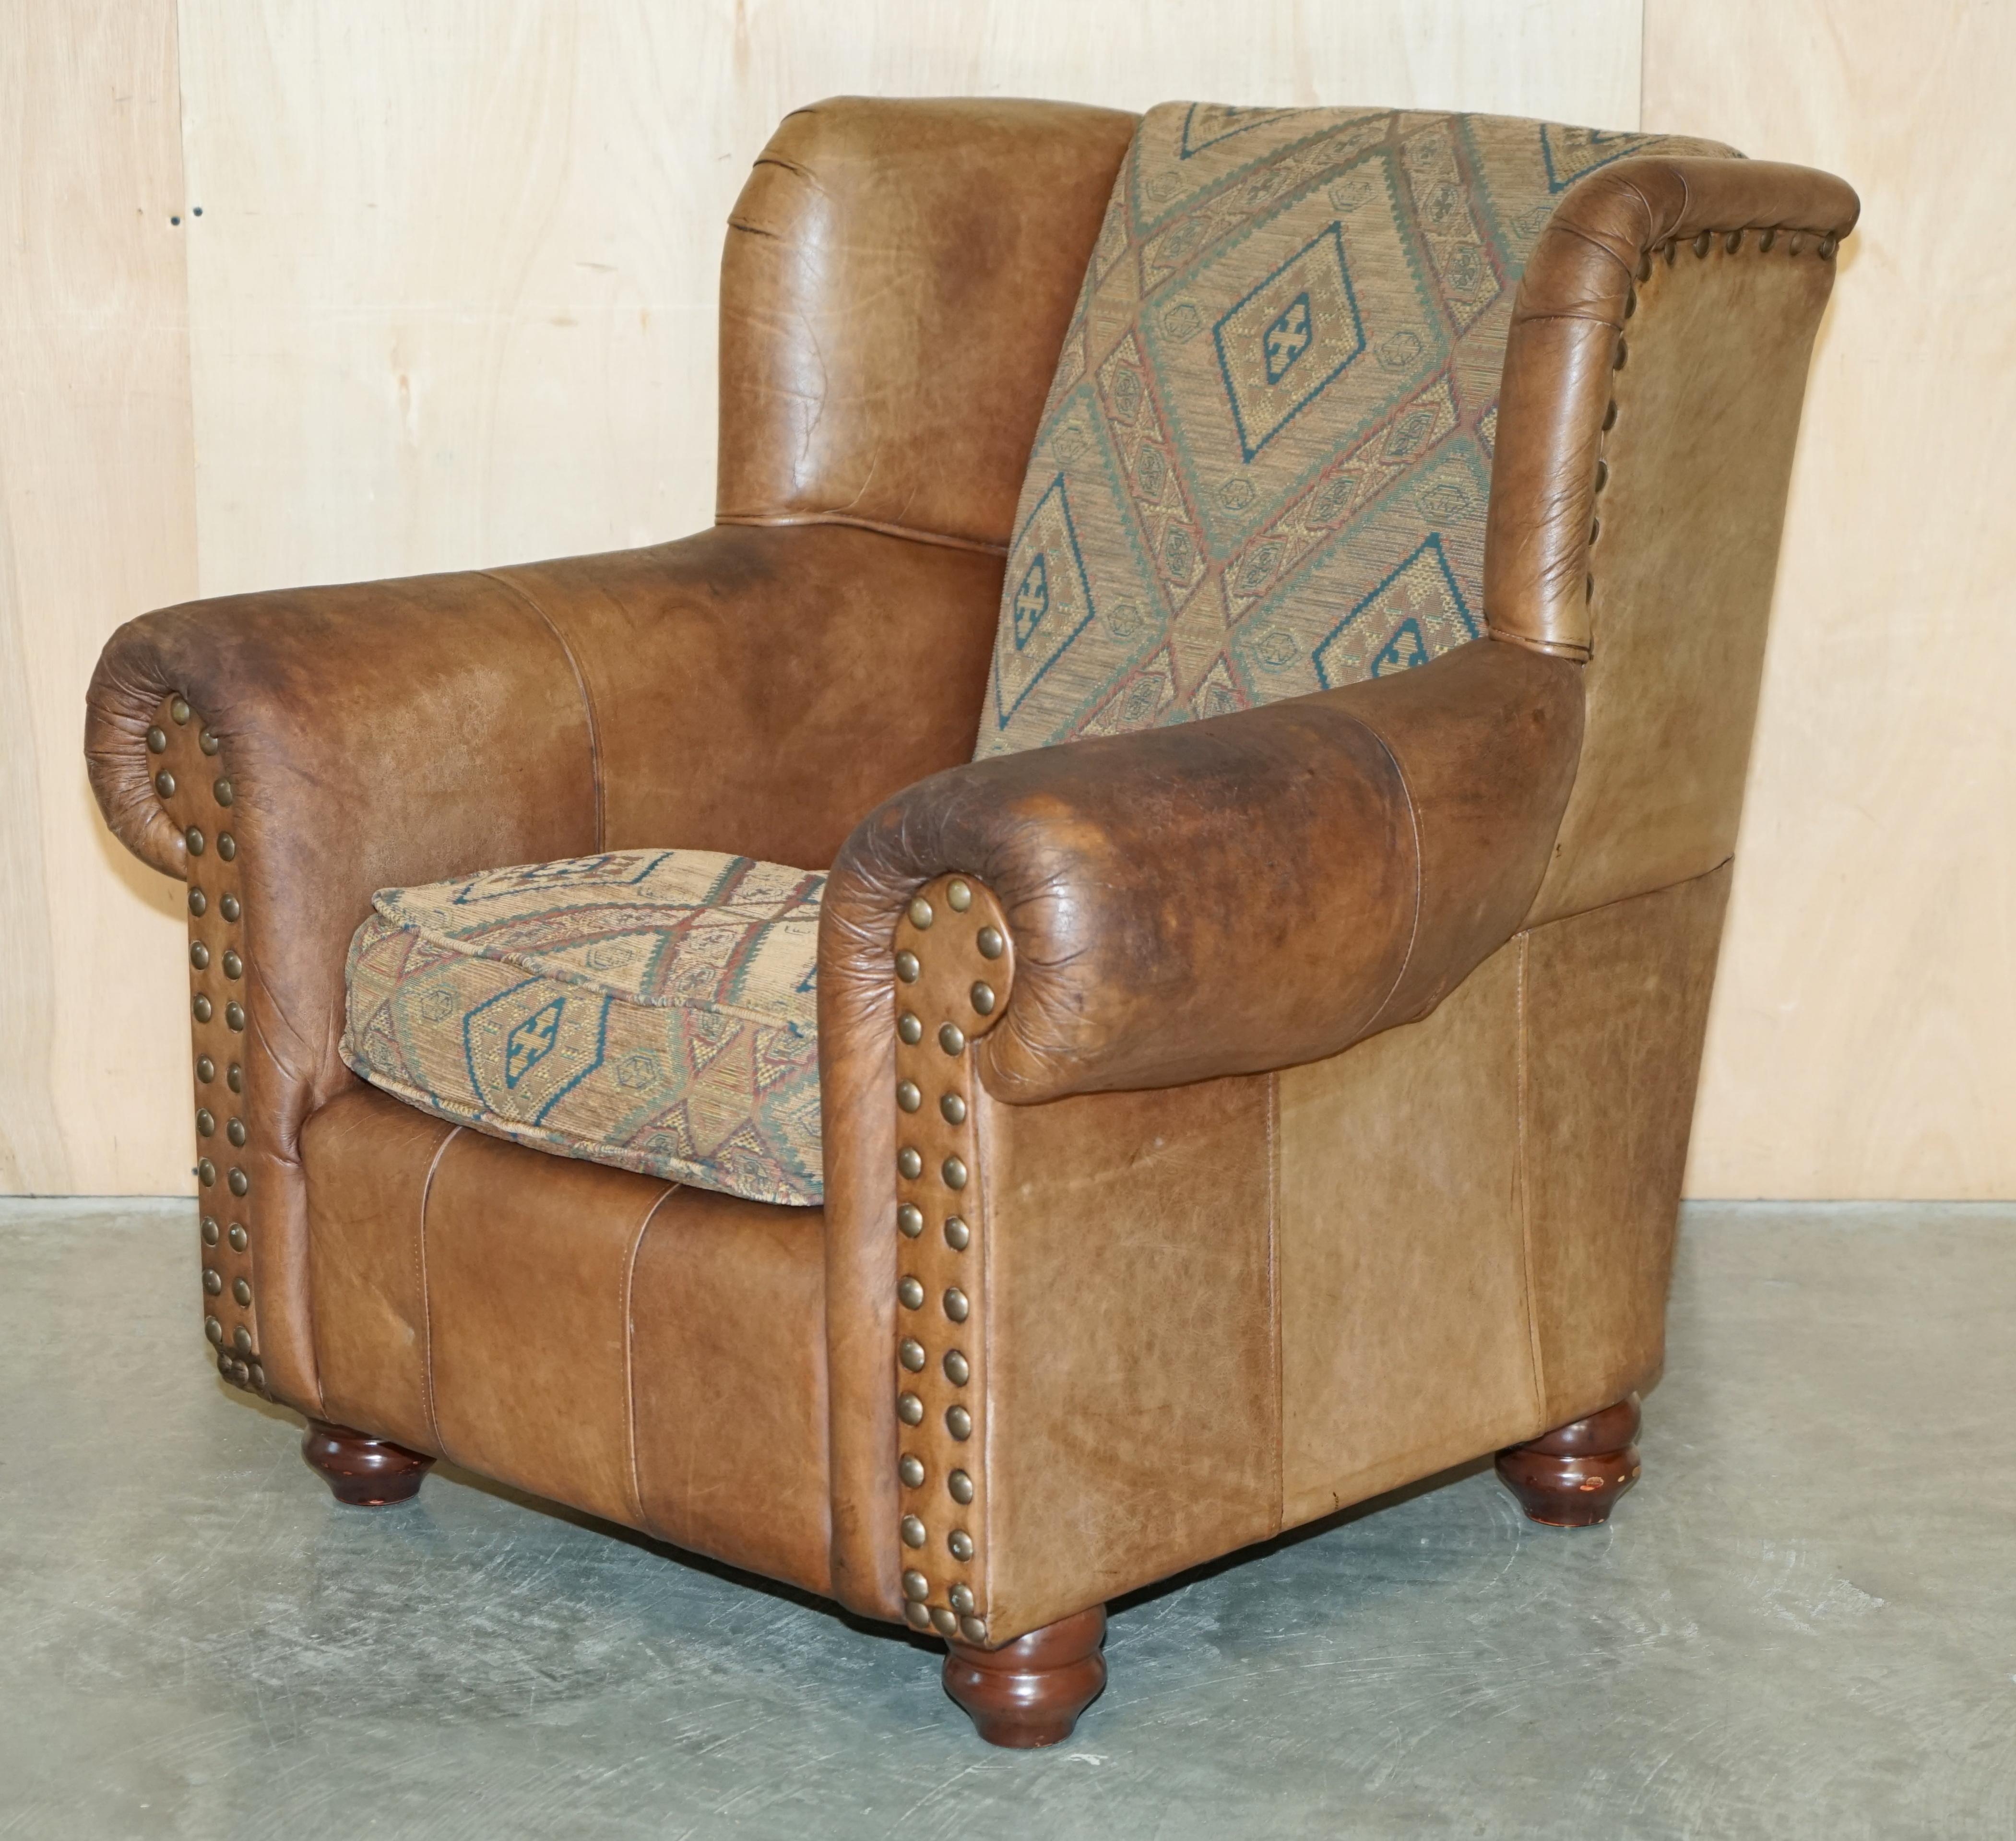 PAIR OF ViNTAGE THOMAS LLOYD BROWN LEATHER KILIM ARMCHAIRS FROM SCOTTISH CASTLe 9